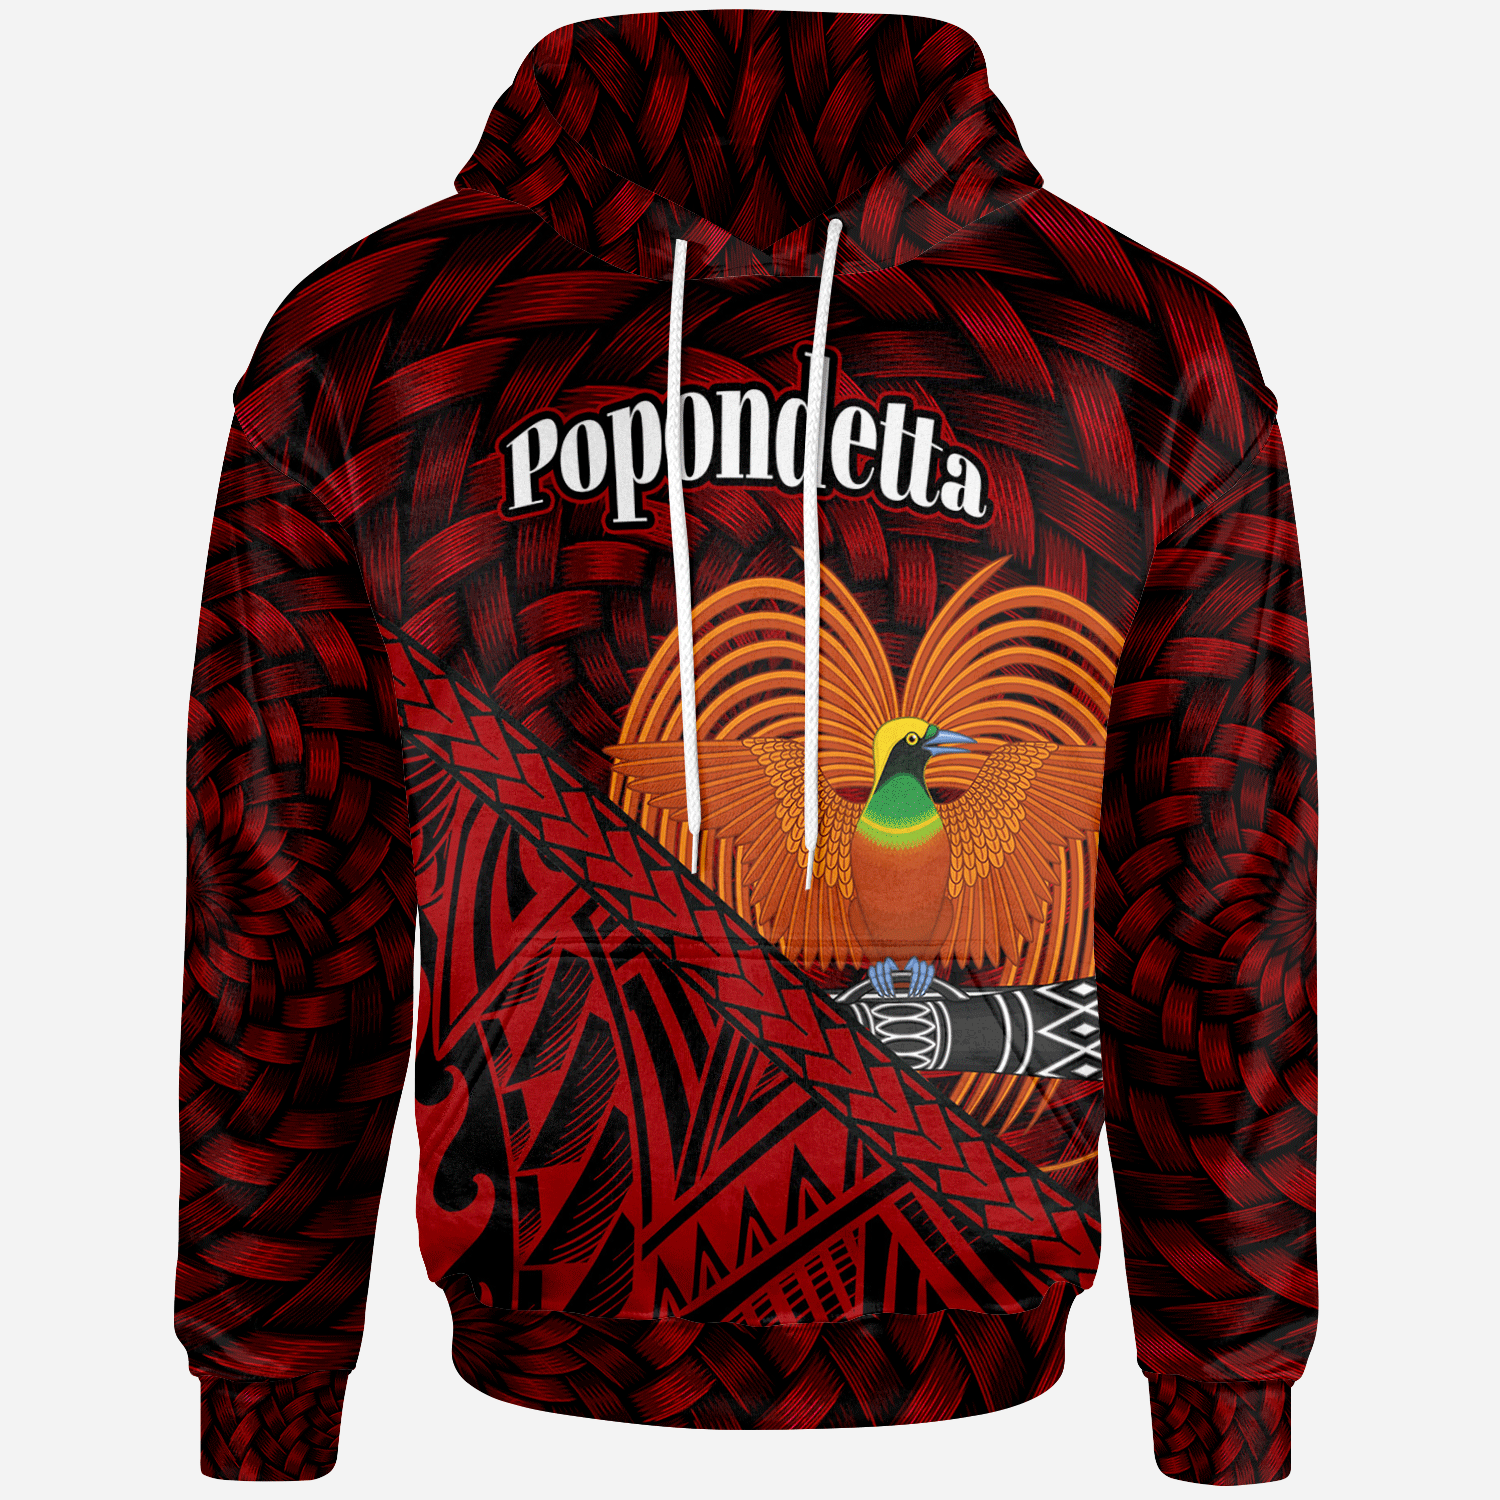 Papua New Guinea Hoodie Popondetta Polynesian Patterns With Bamboo Unisex Red - Polynesian Pride